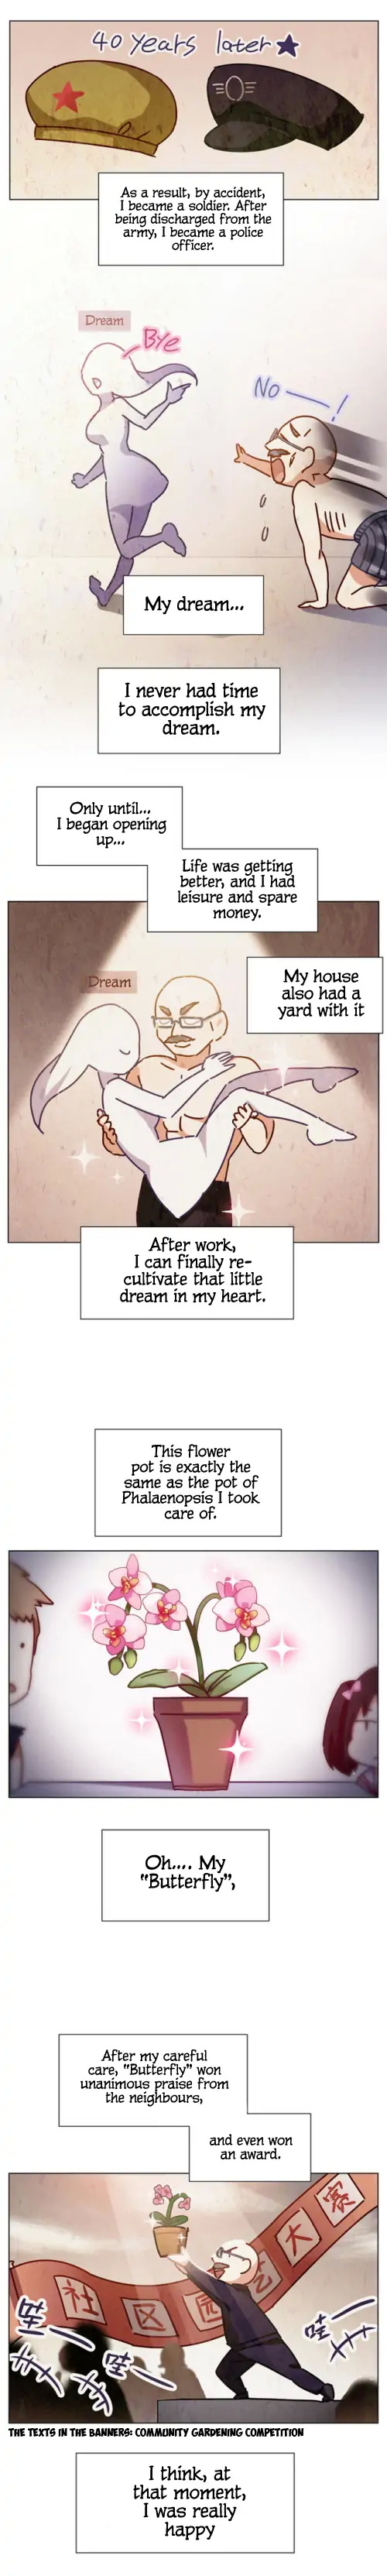 Intimate Flower - Page 2